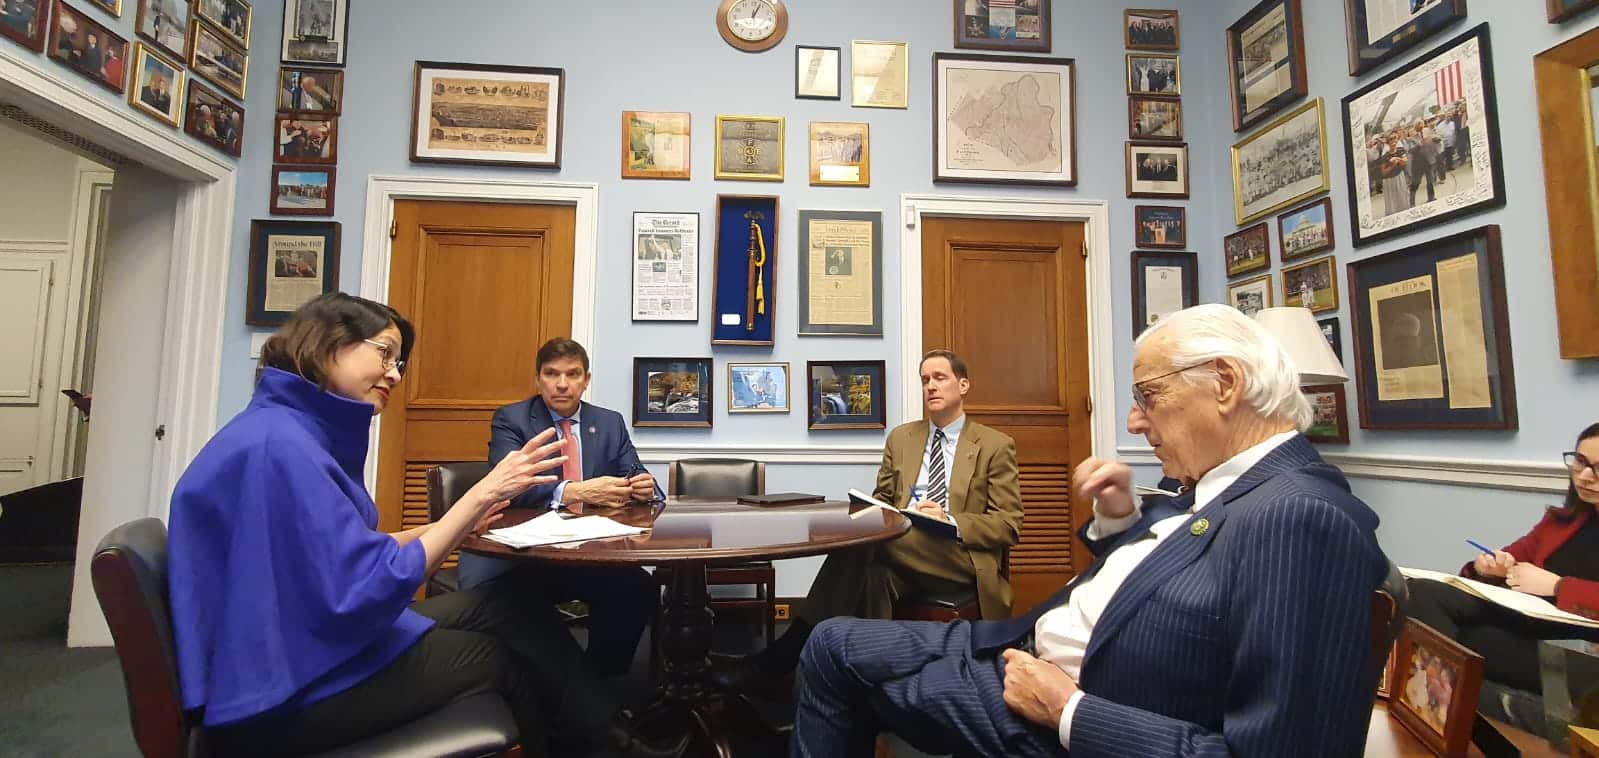 Ana Cecilia Gervasi during a meeting with US congresspersons Bill Pascrell, Jim Himes, and Vicente Gonzalez in Washington, DC, on January 31, 2023. Photo: Twitter/@CancilleriaPeru.